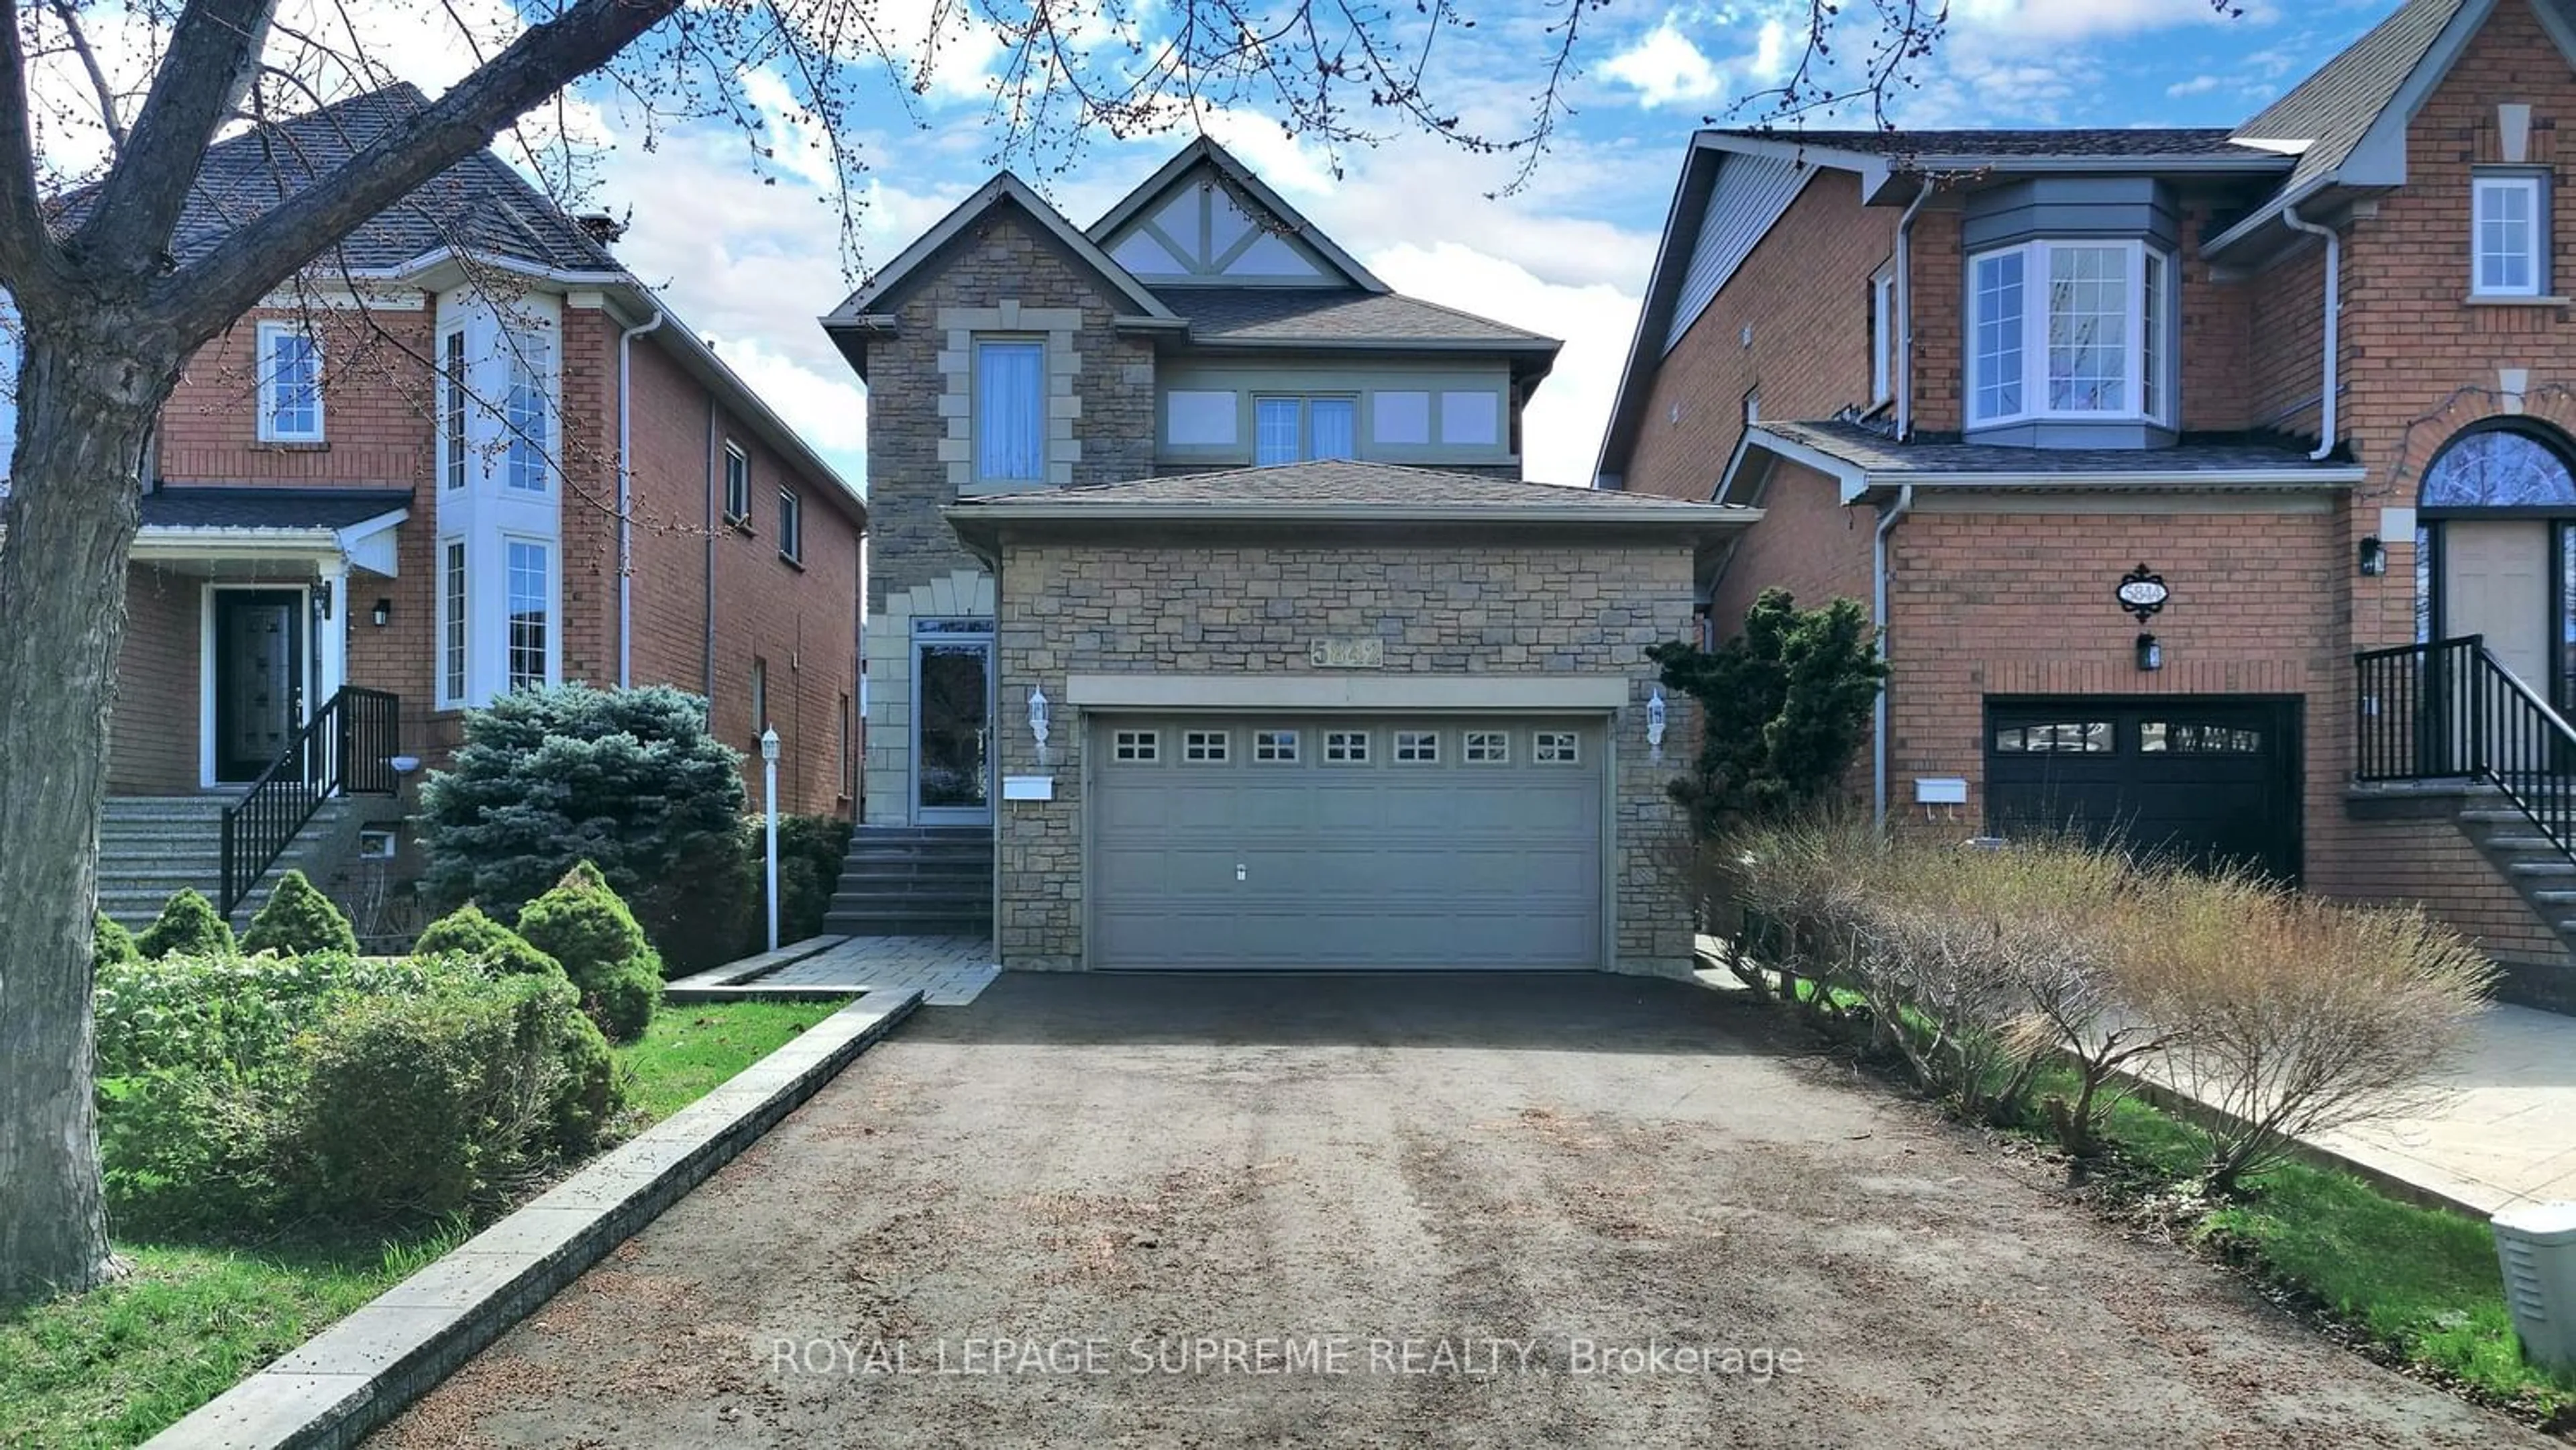 Home with brick exterior material for 5842 Dalebrook Cres, Mississauga Ontario L5M 5R8